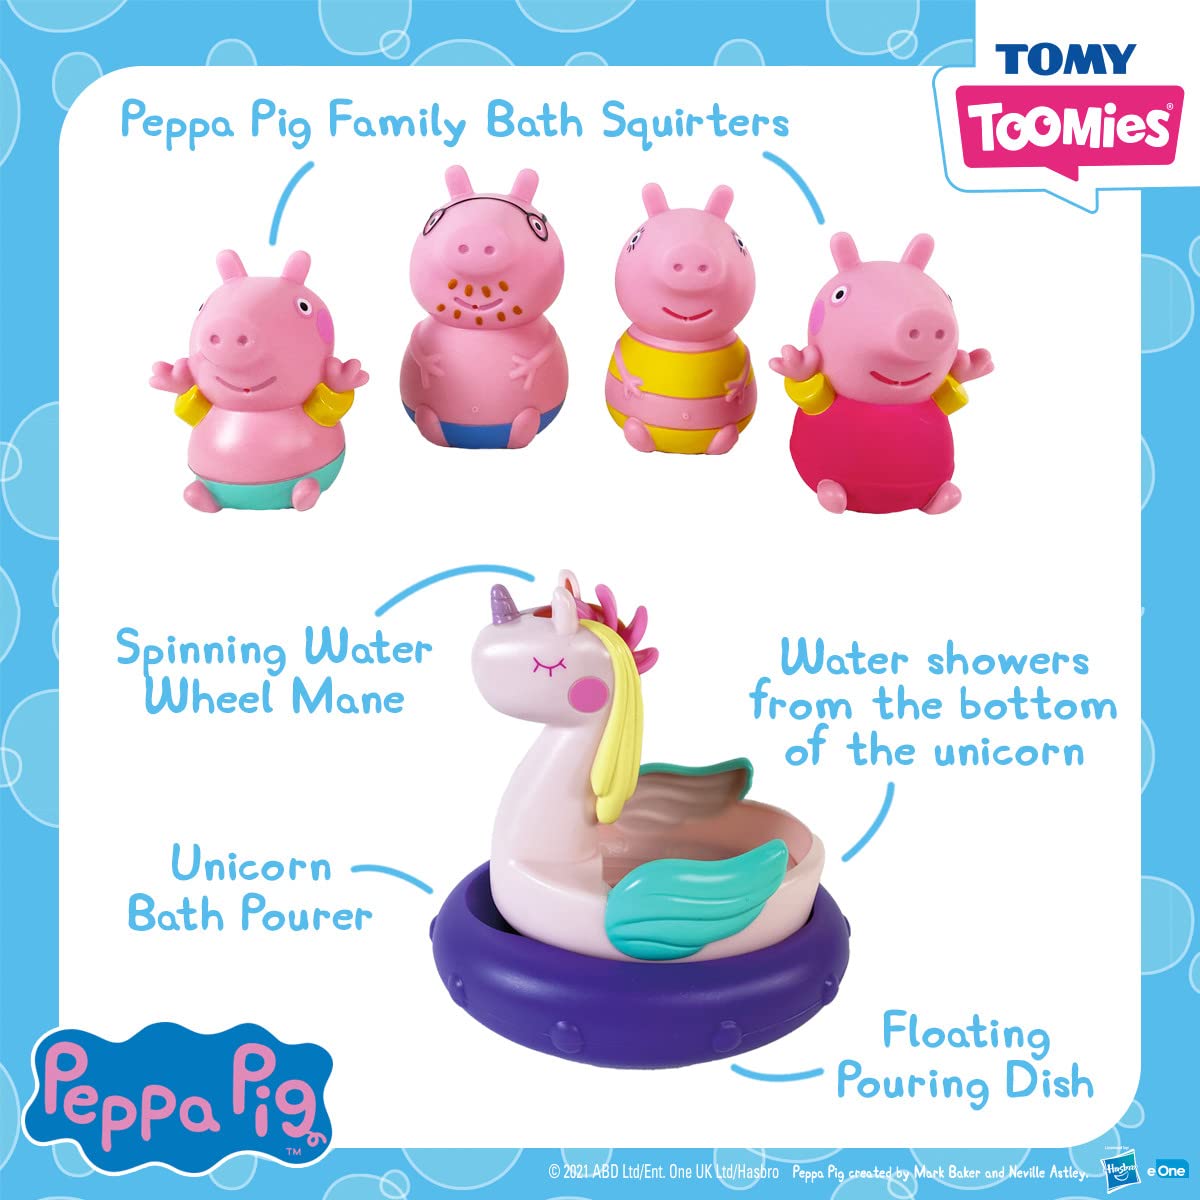 Peppa Pig Bath Toys – Baby Bath Toys Promote Dexterity and Motor Skills – Toddler Toys for Bath and Pool – Bath Squirties for Boys and Girls 18 Months and Up